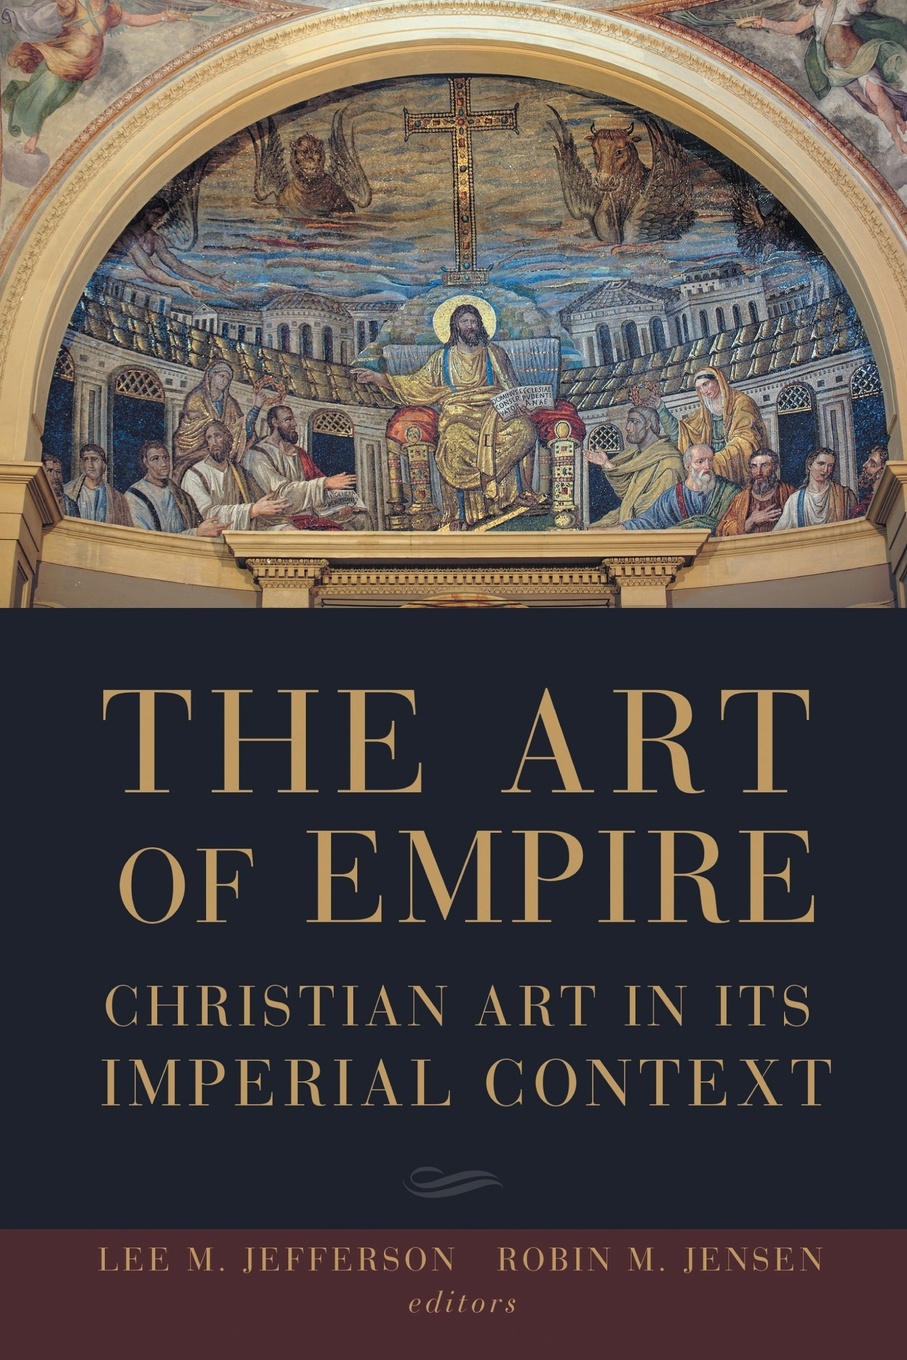 The Art of Empire. Christian Art in Its Imperial Context